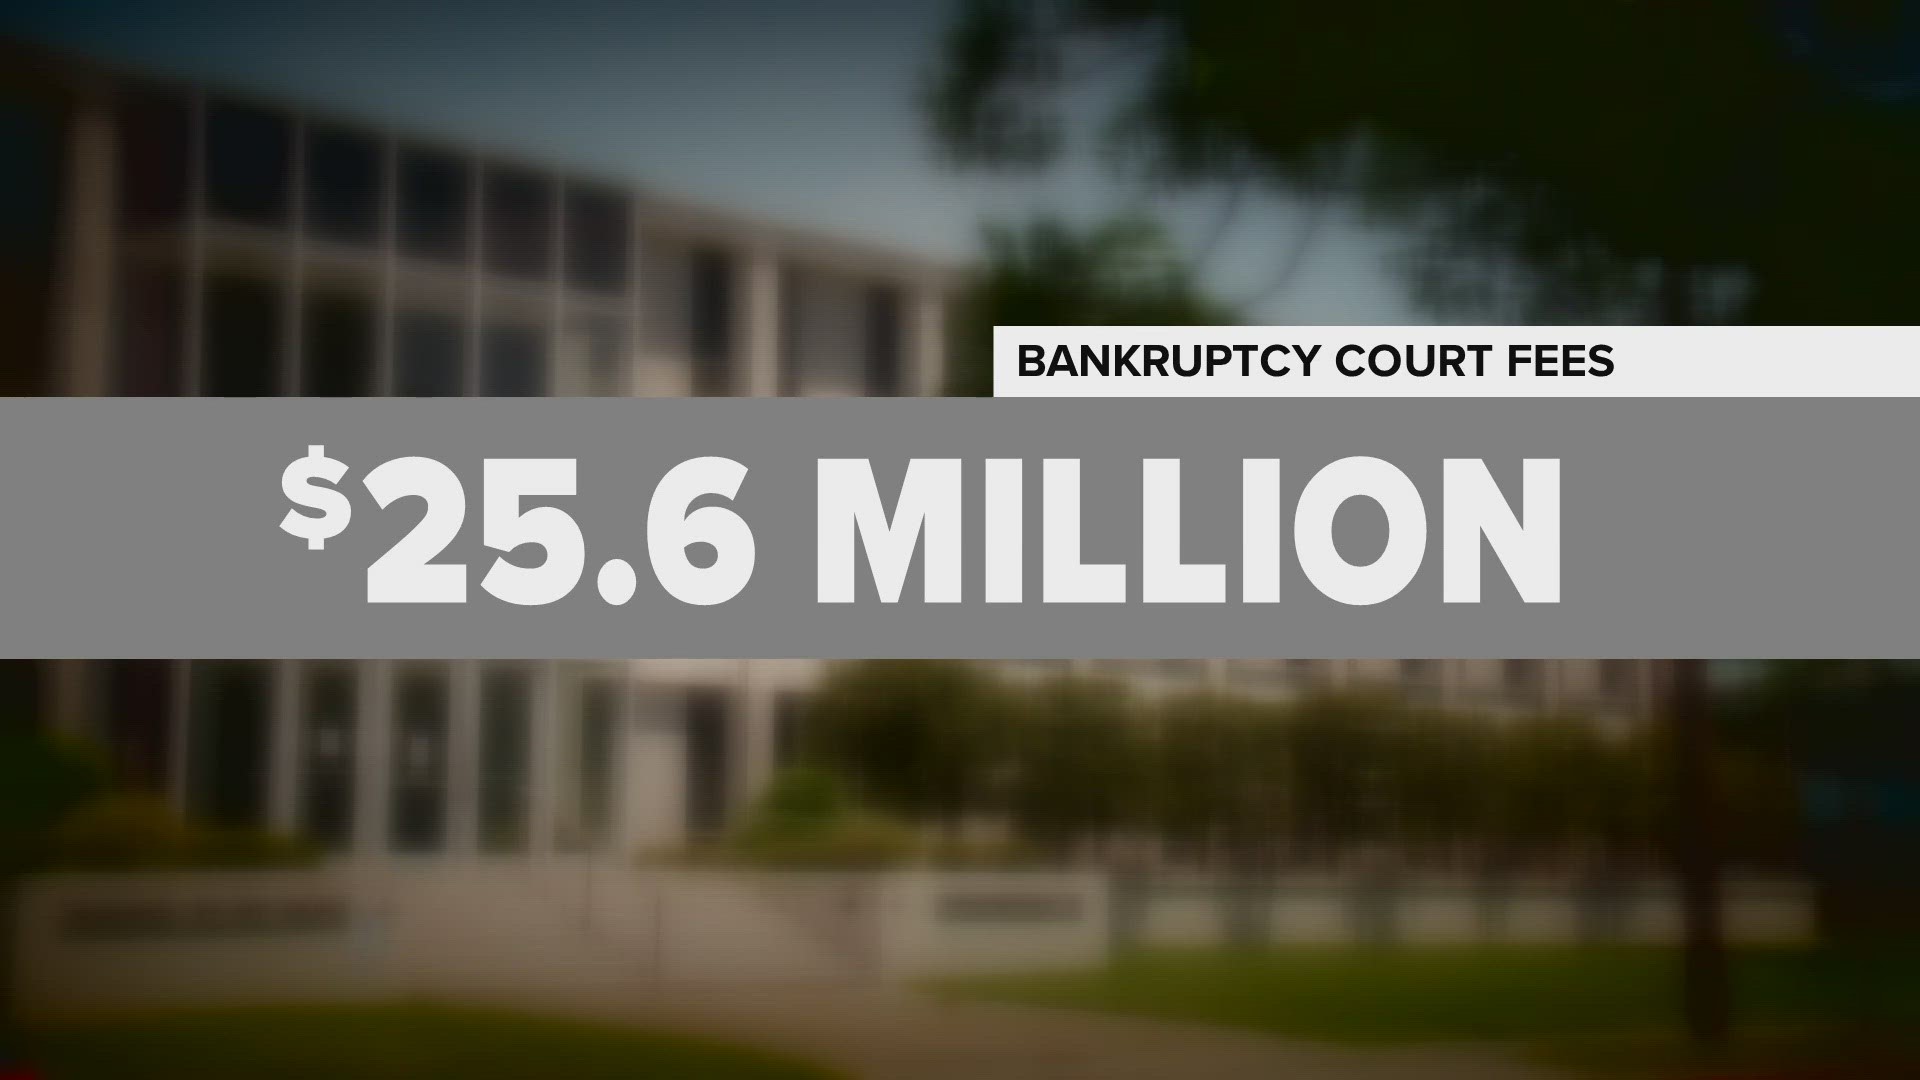 It's $13 million and counting to the church’s own bankruptcy lawyers and accountants, who have fought to justify the church’s need for protection from creditors.